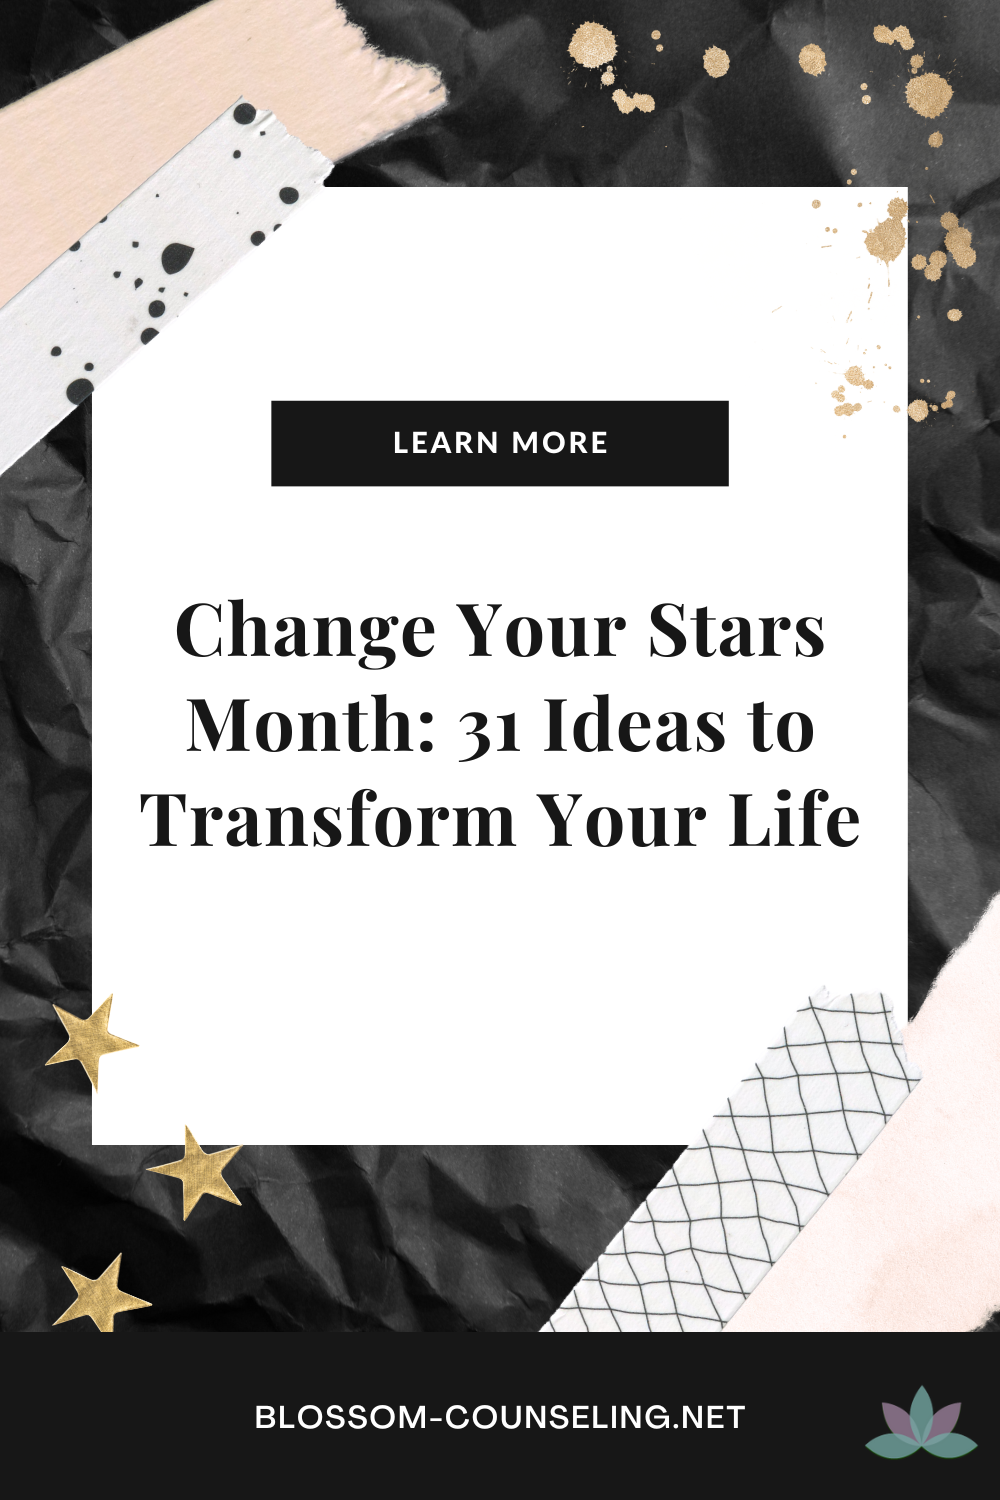 Change Your Stars Month: 31 Ideas to Transform Your Life